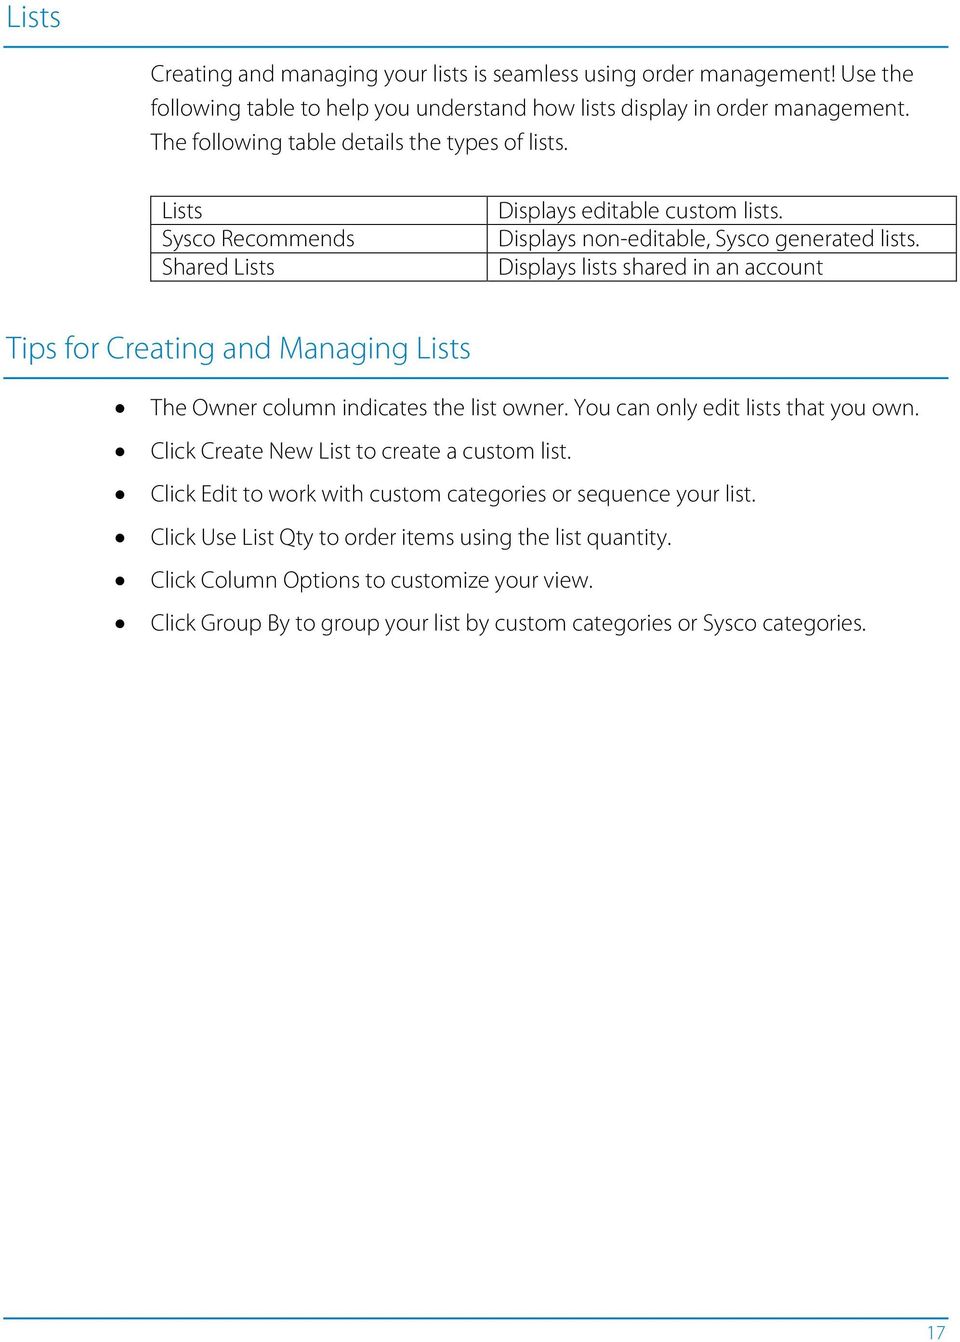 Displays lists shared in an account Tips for Creating and Managing Lists The Owner column indicates the list owner. You can only edit lists that you own.